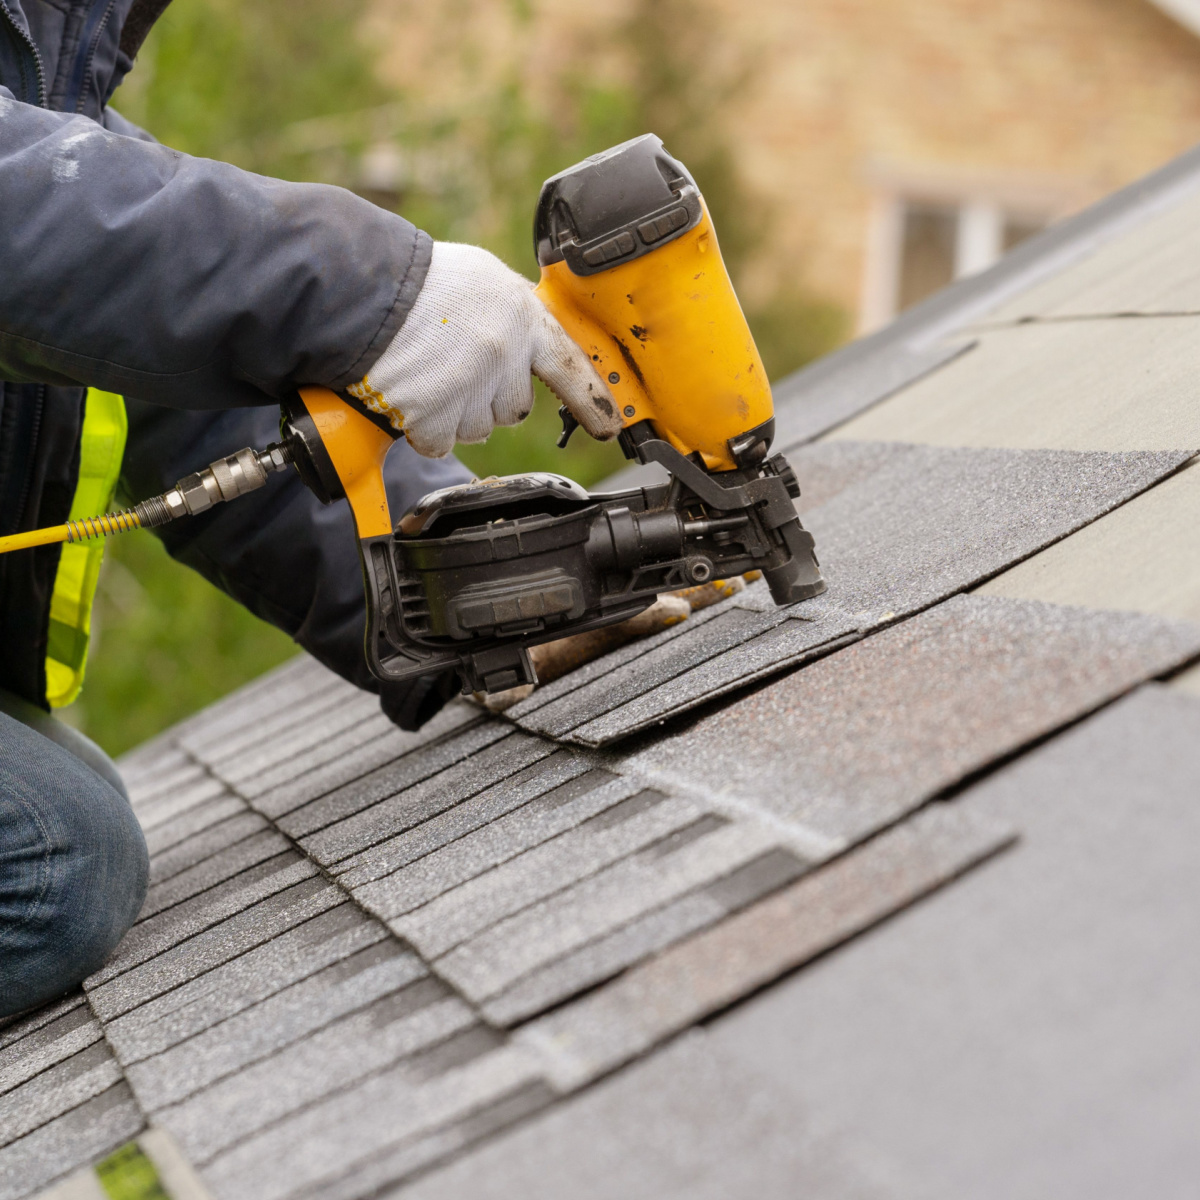 A roofer nailing down shingles